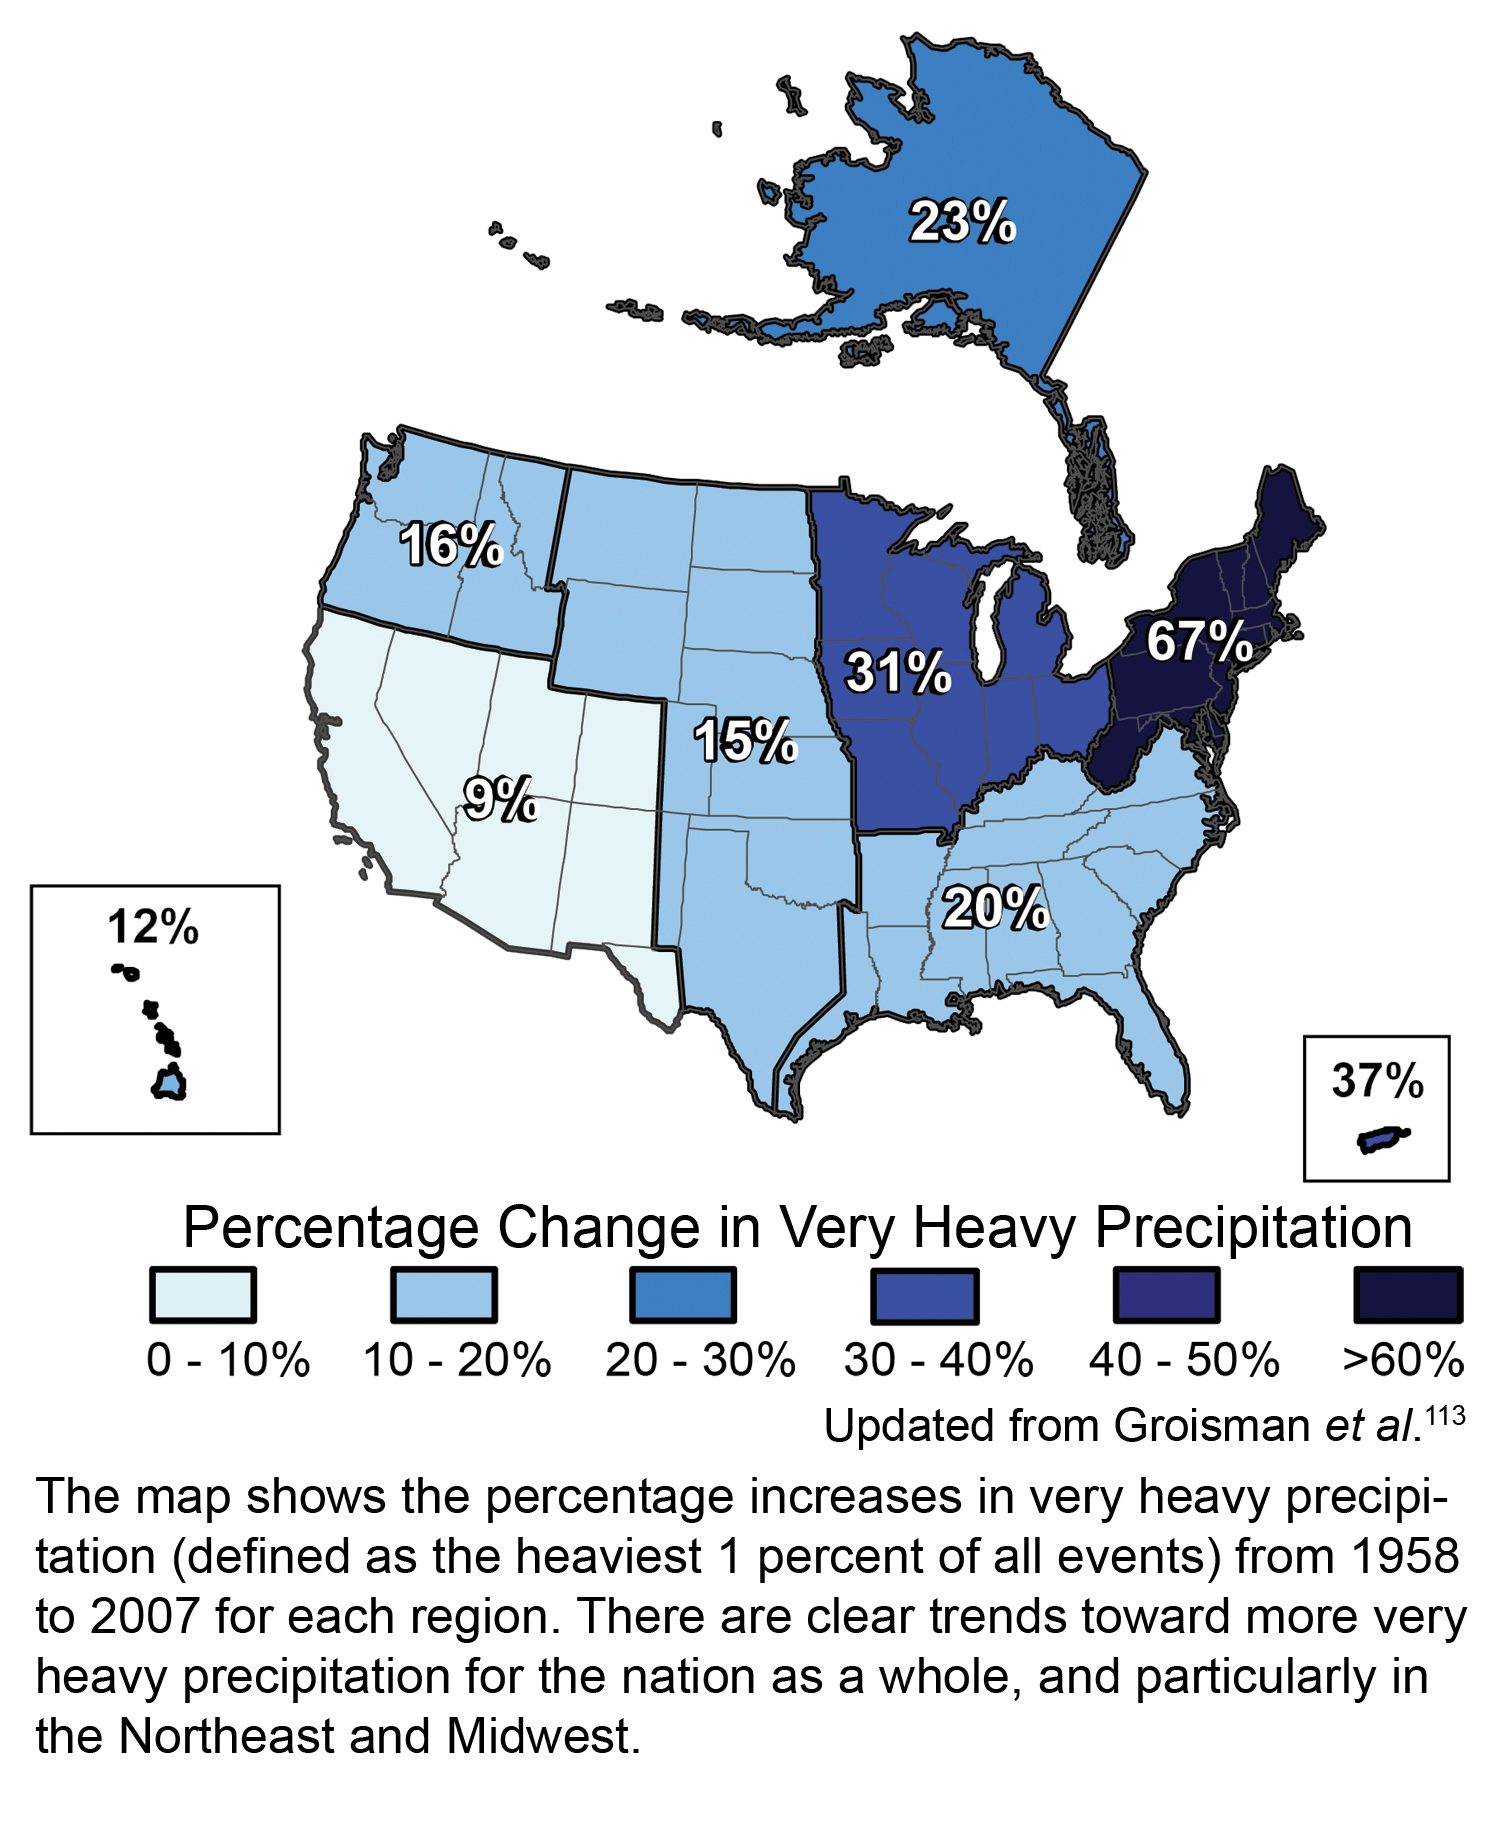 % heavy precip increase 1958-2007. North east +67%, Midwest 31%, South West 9% North West  16%, South 20%, Central US 15%, Alaska 23%